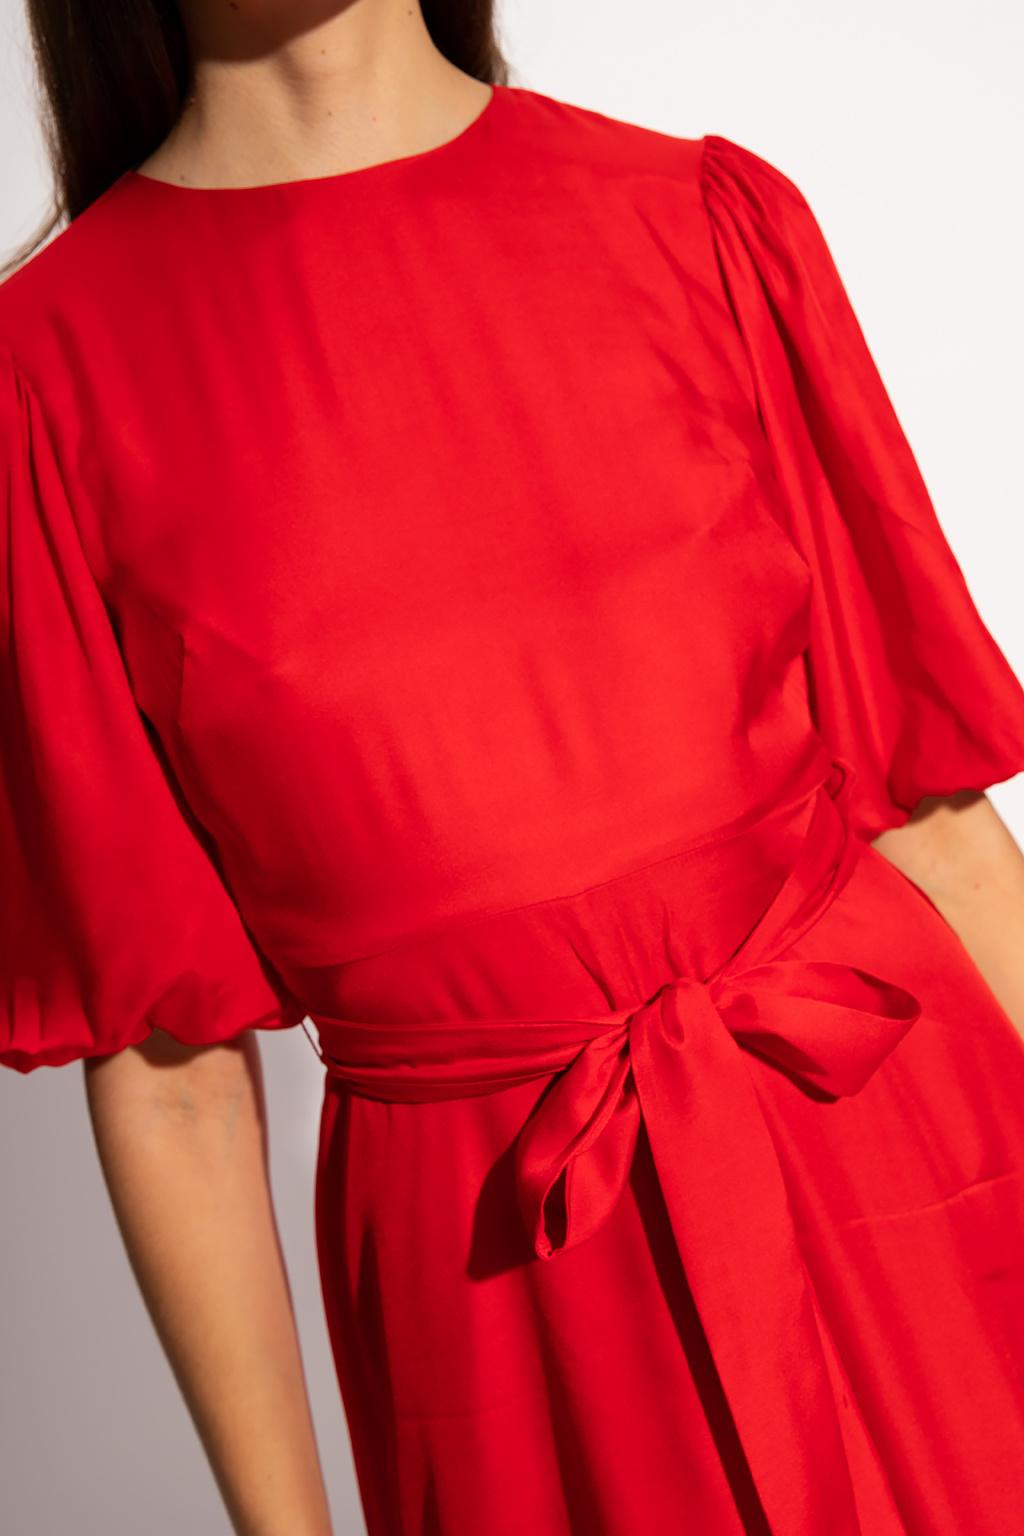 Kate Spade Dress With Puff Sleeves in Red | Lyst